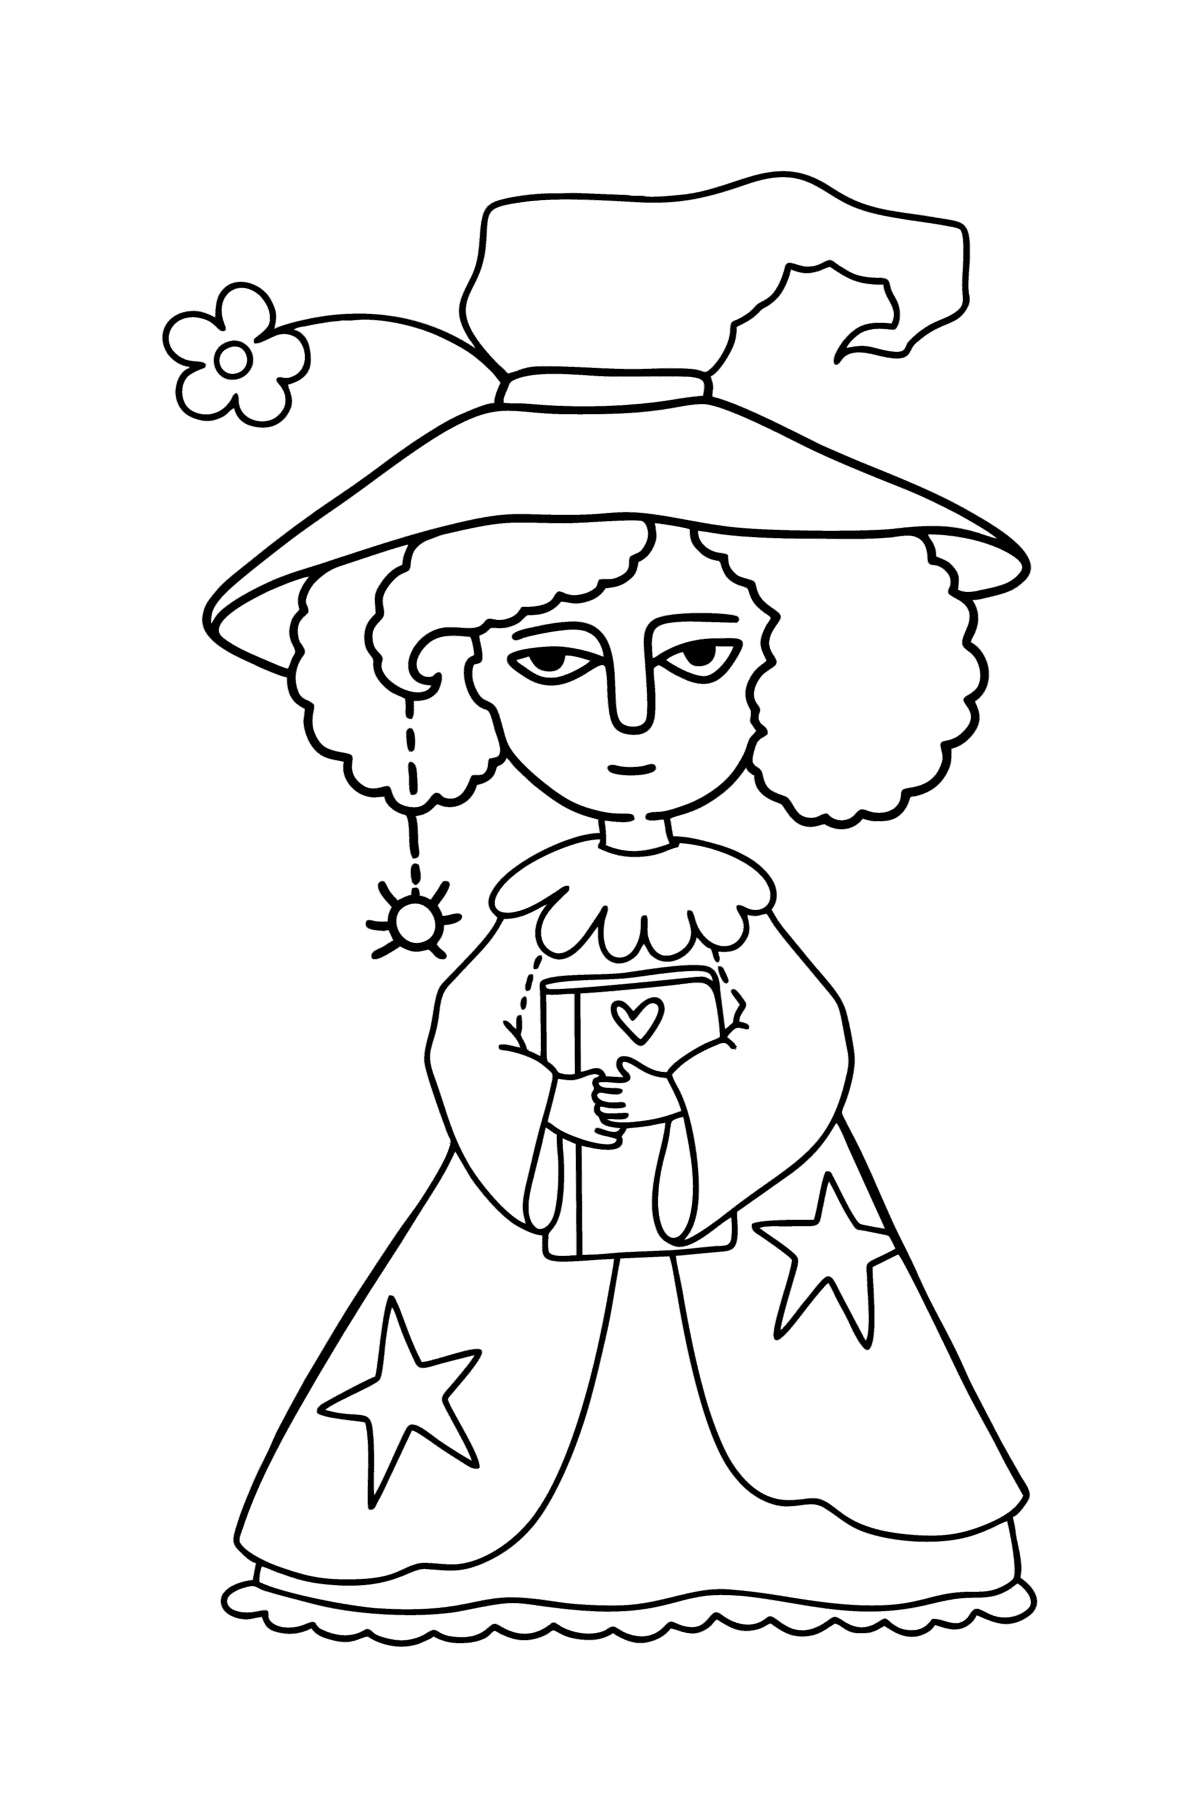 Little witch with a book сoloring page - Coloring Pages for Kids